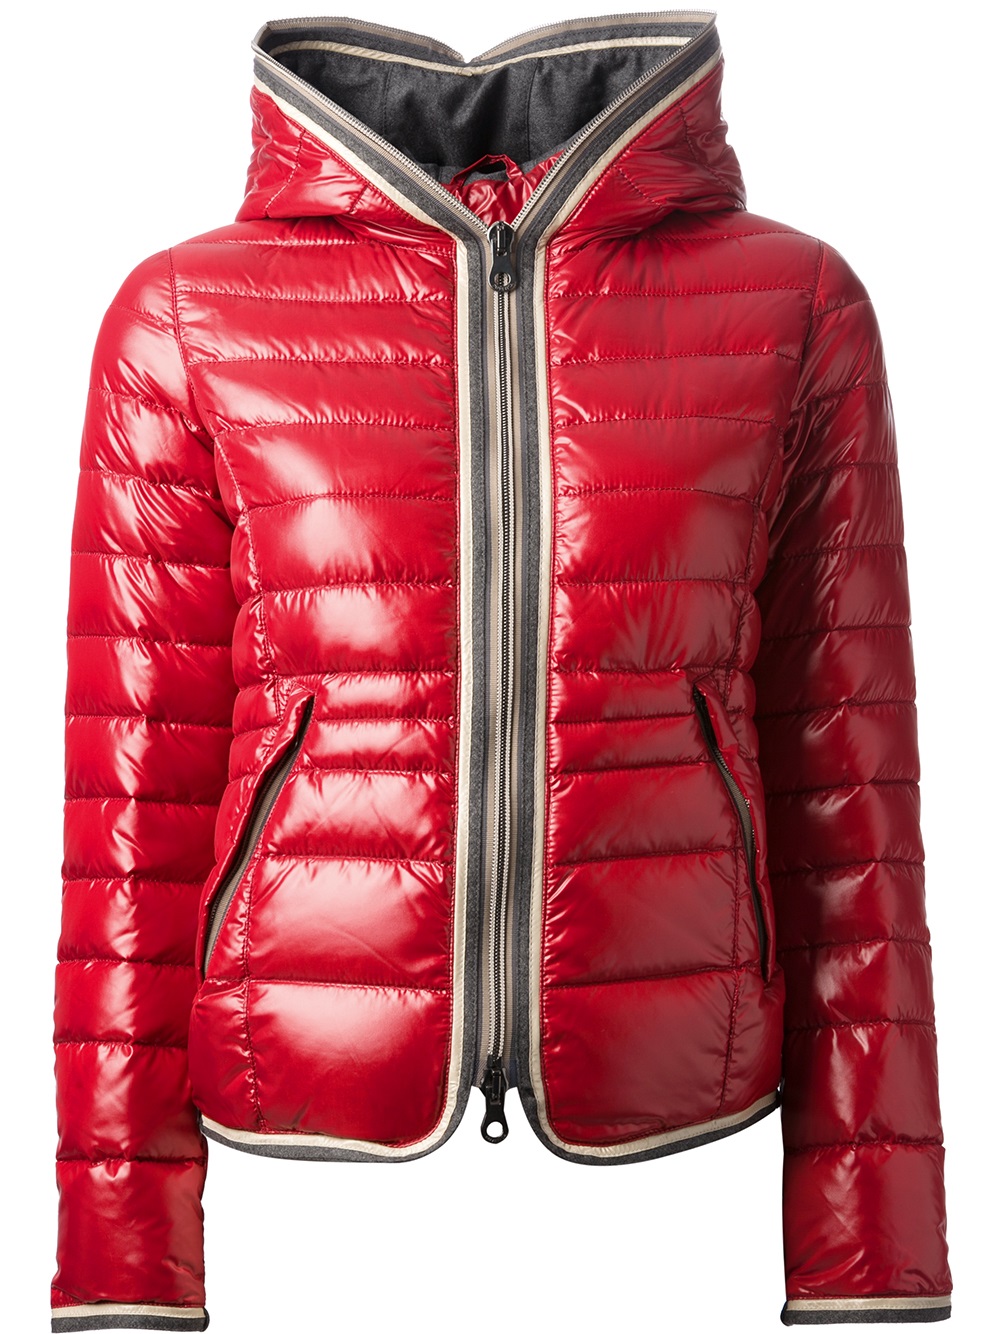 Lyst - Duvetica Puffer Jacket in Red